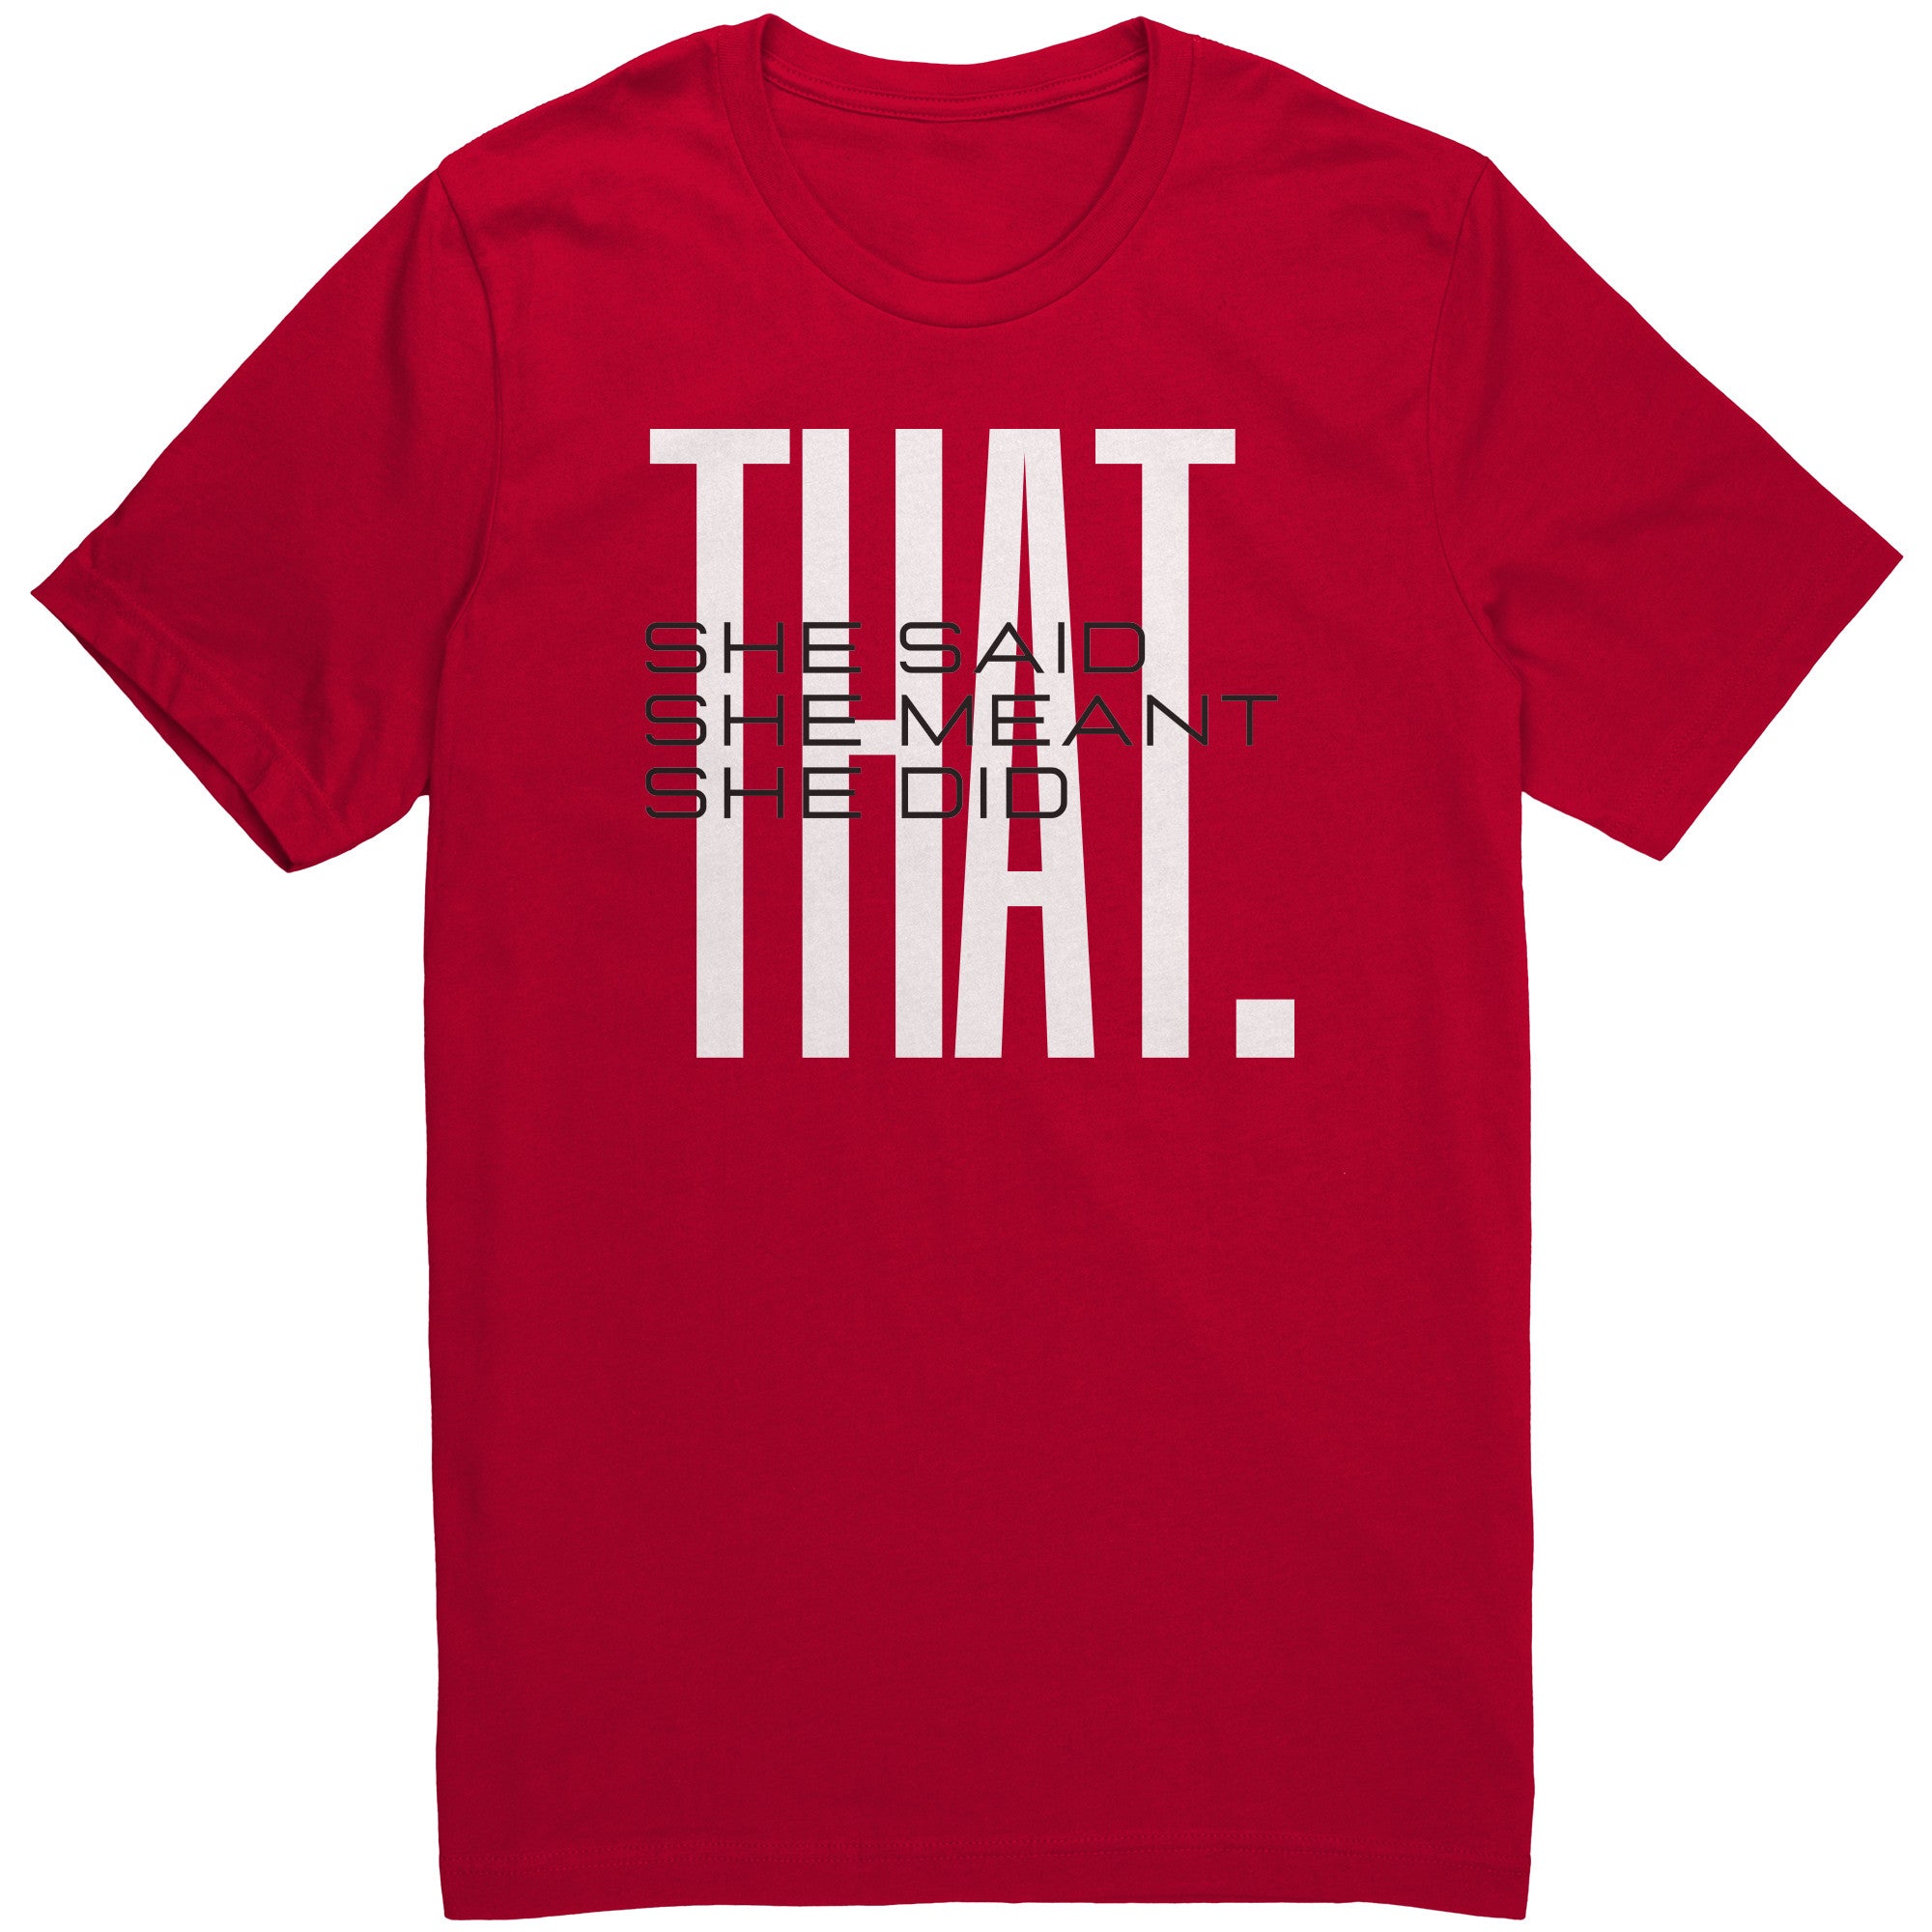 She Said Meant Did THAT Comfy DST Tee